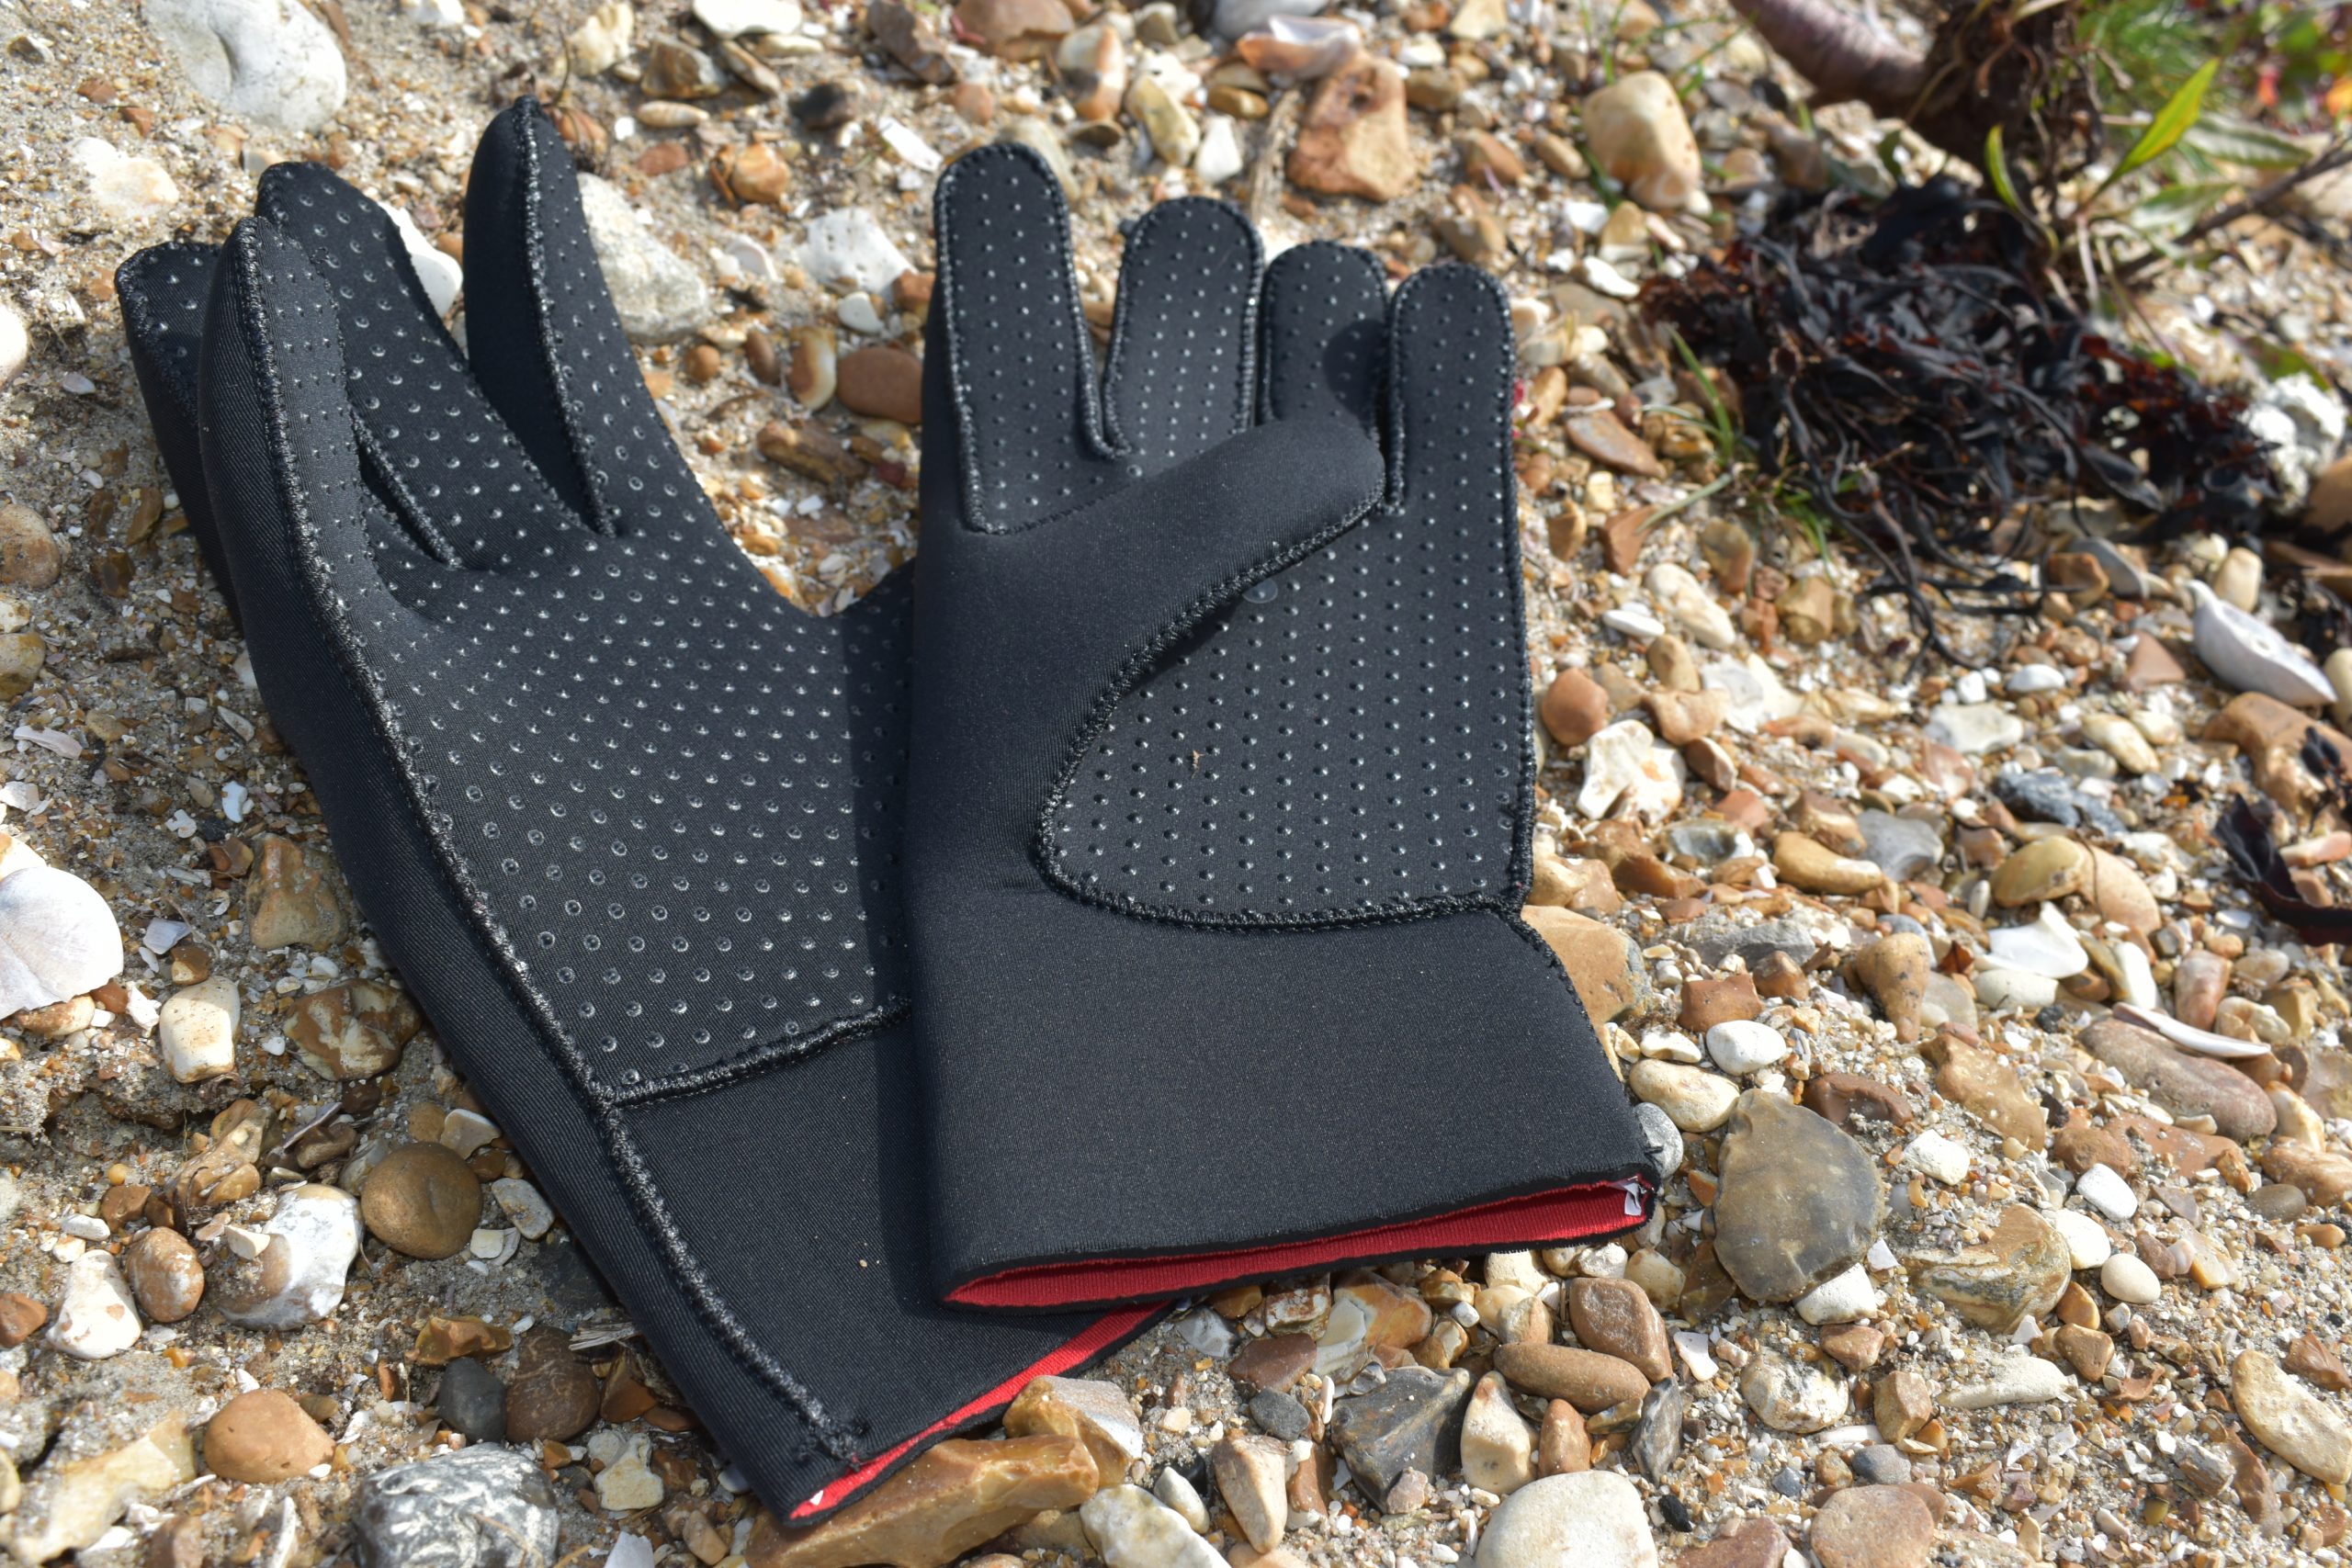 Titanium 3mm Wetsuit Gloves with GBS seams - North Coast Wetsuits - NCW